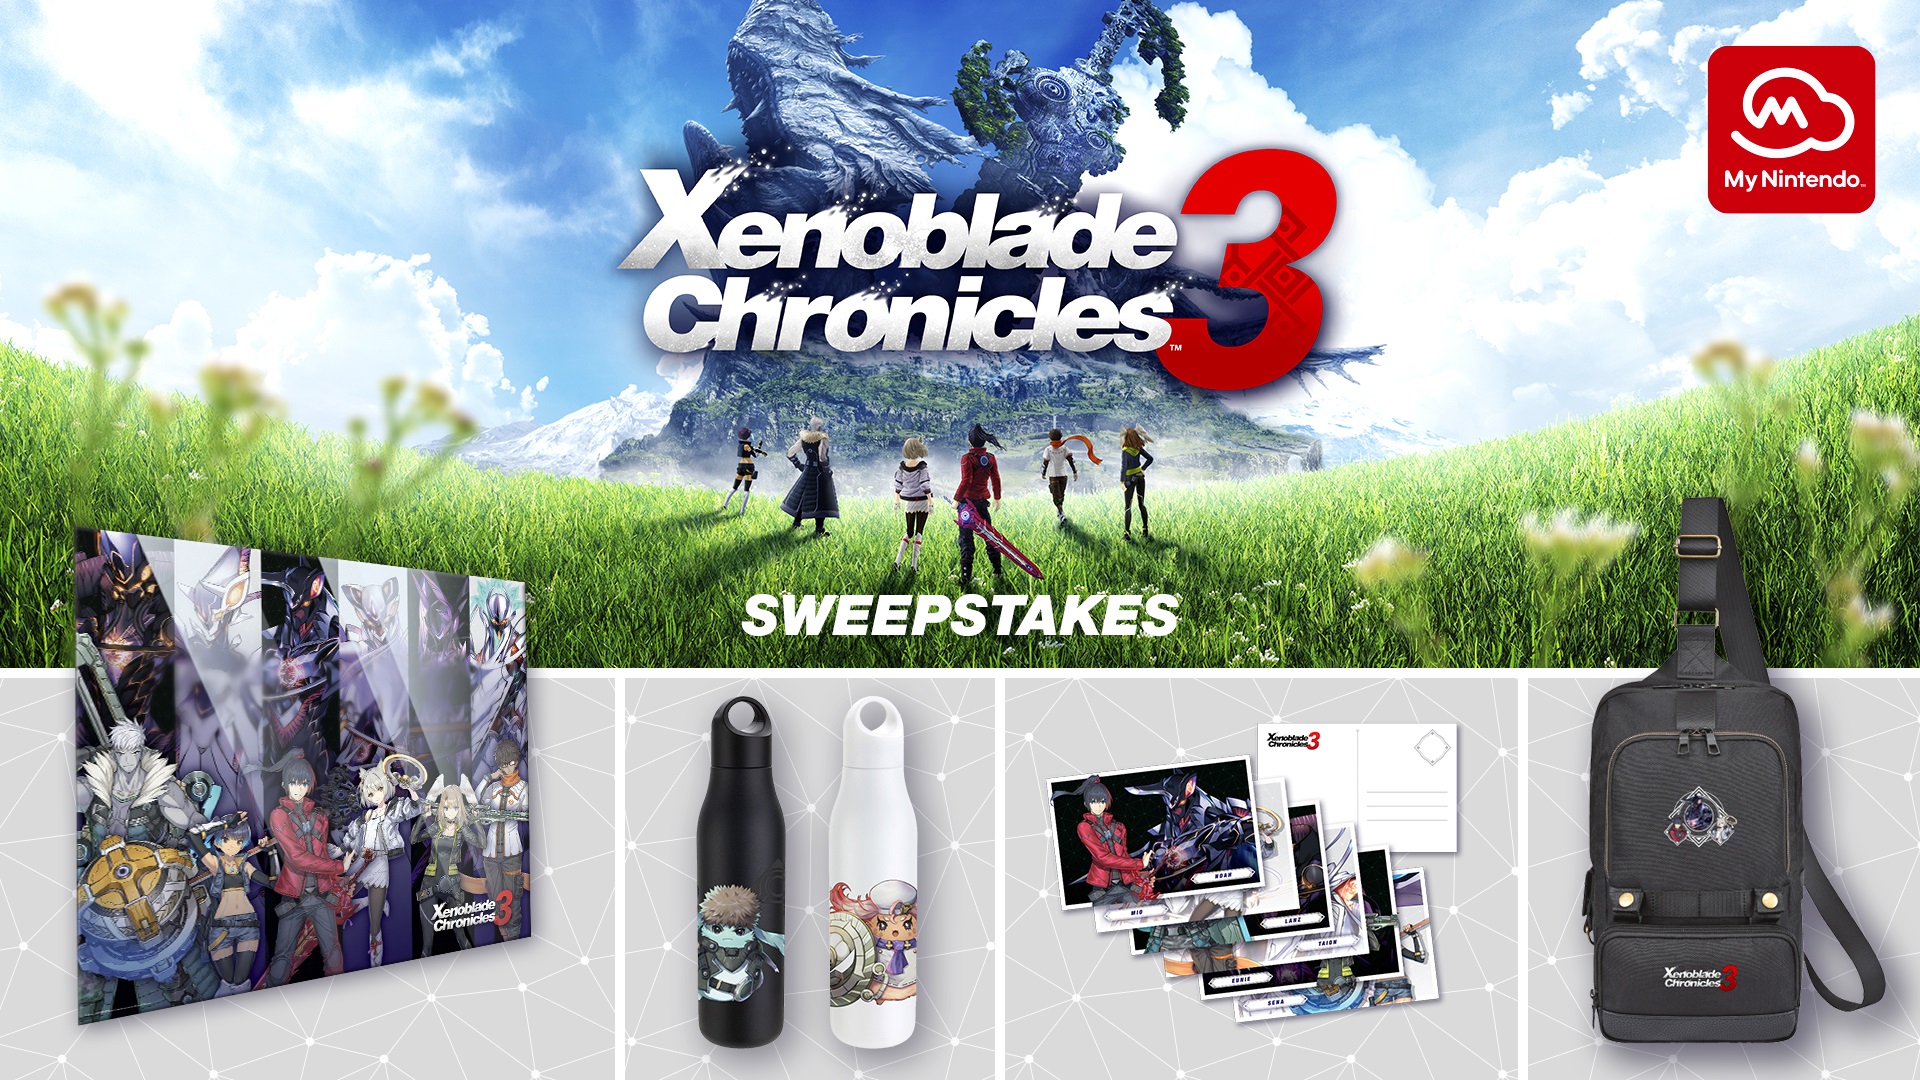 https://www.destructoid.com/wp-content/uploads/2022/07/Xenoblade-Chronicles-3-prize-pack.jpg?fit=1920%2C1080